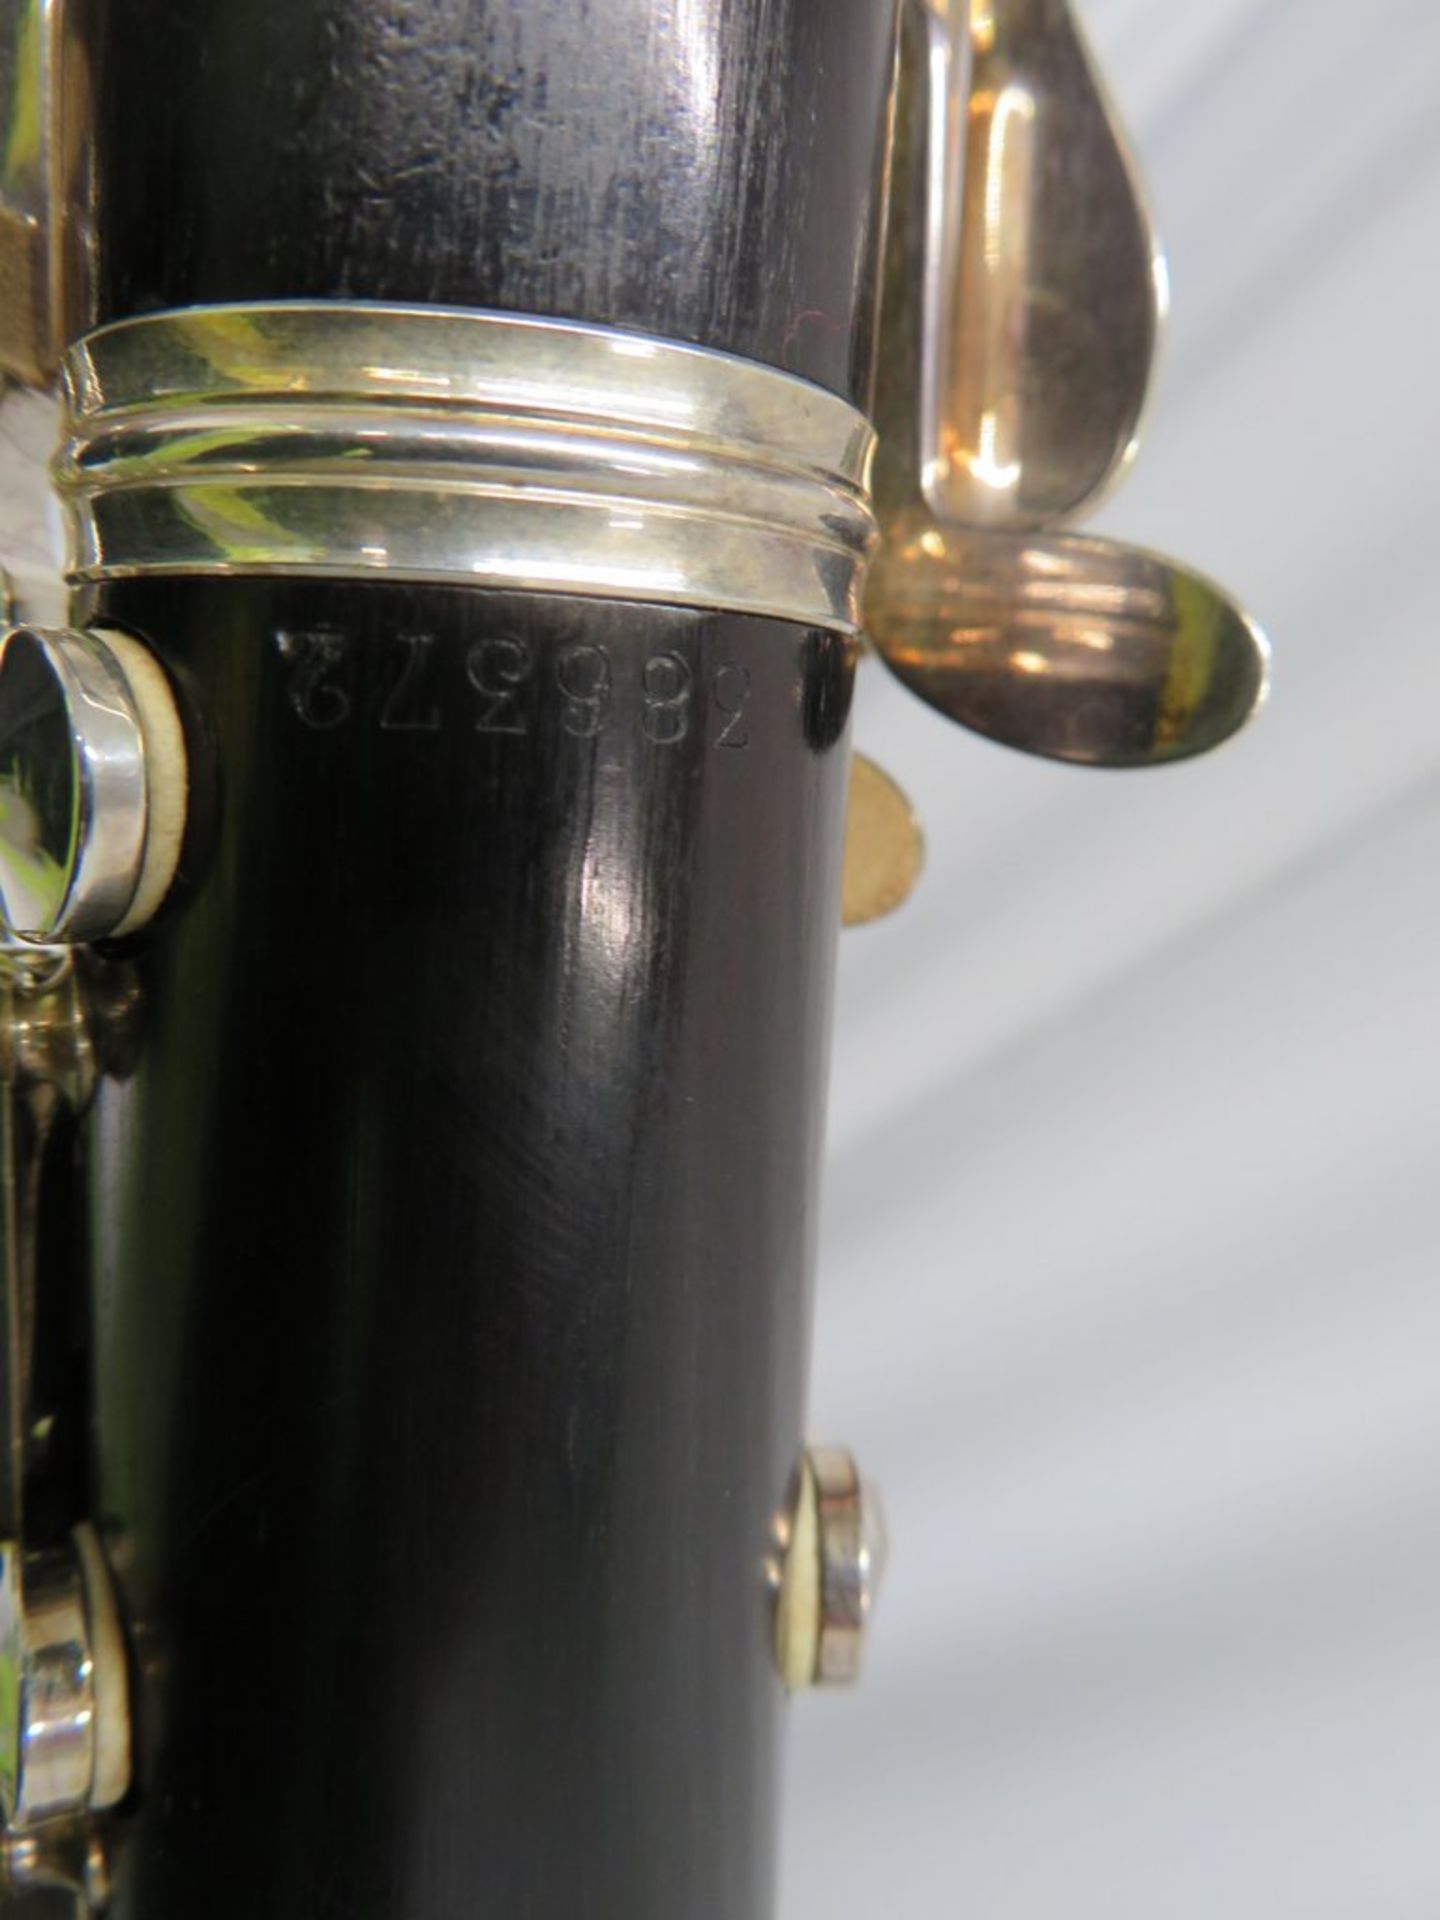 Buffet Crampon R13 Clarinet With Case. Serial Number: 386372. Full Length 63cm. Please Not - Image 17 of 18